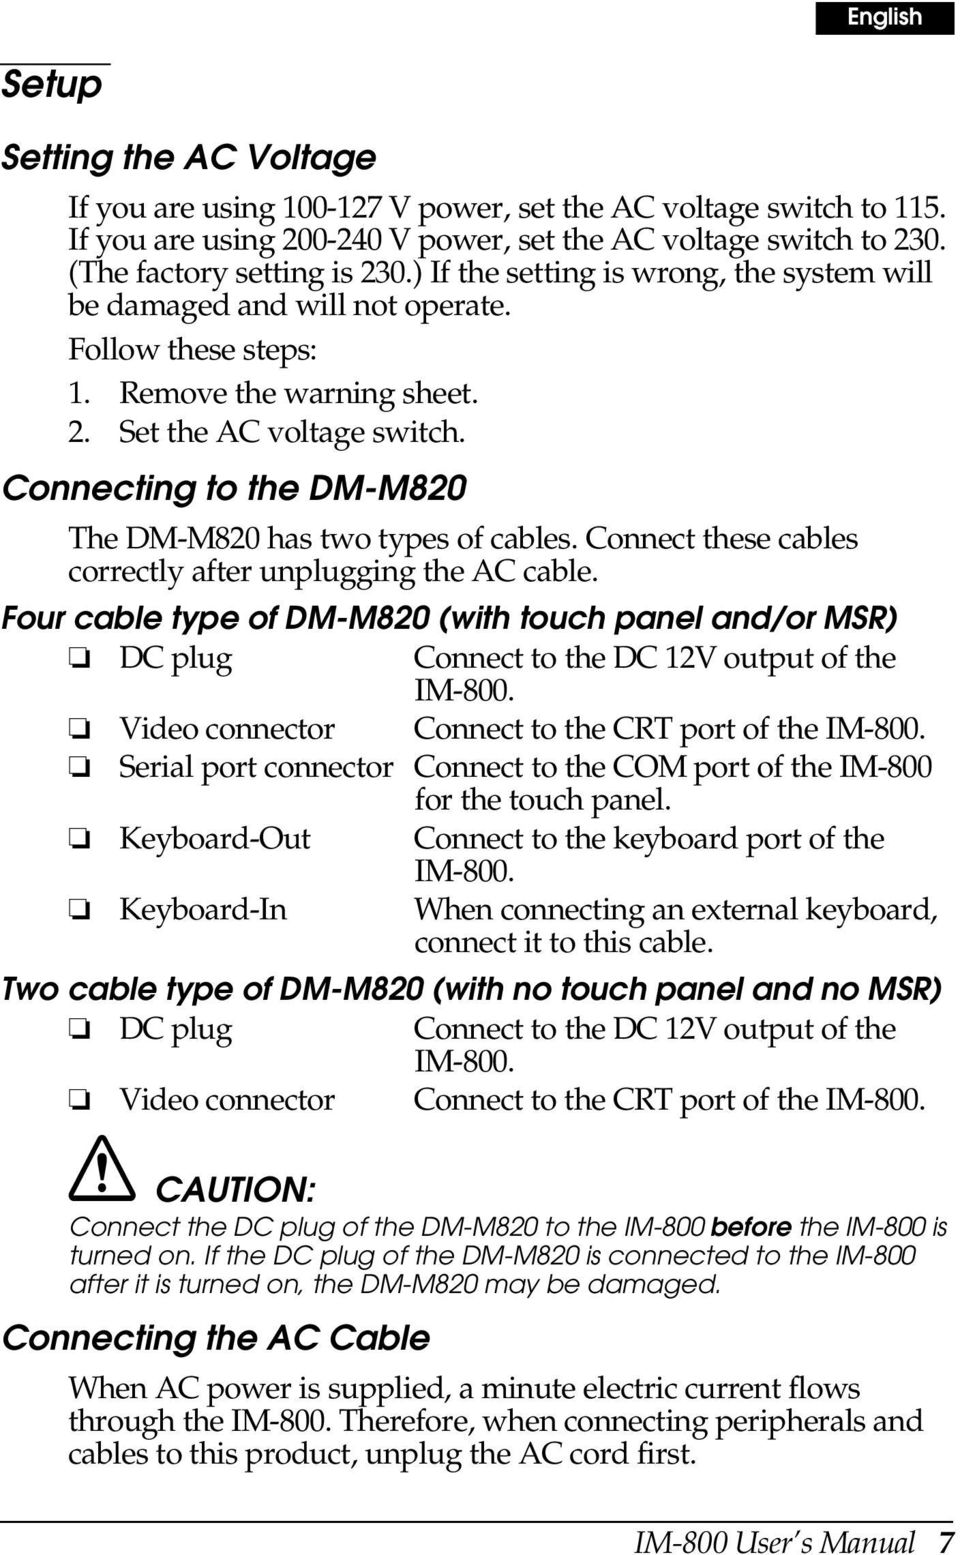 Connecting to the DM-M820 The DM-M820 has two types of cables. Connect these cables correctly after unplugging the AC cable.